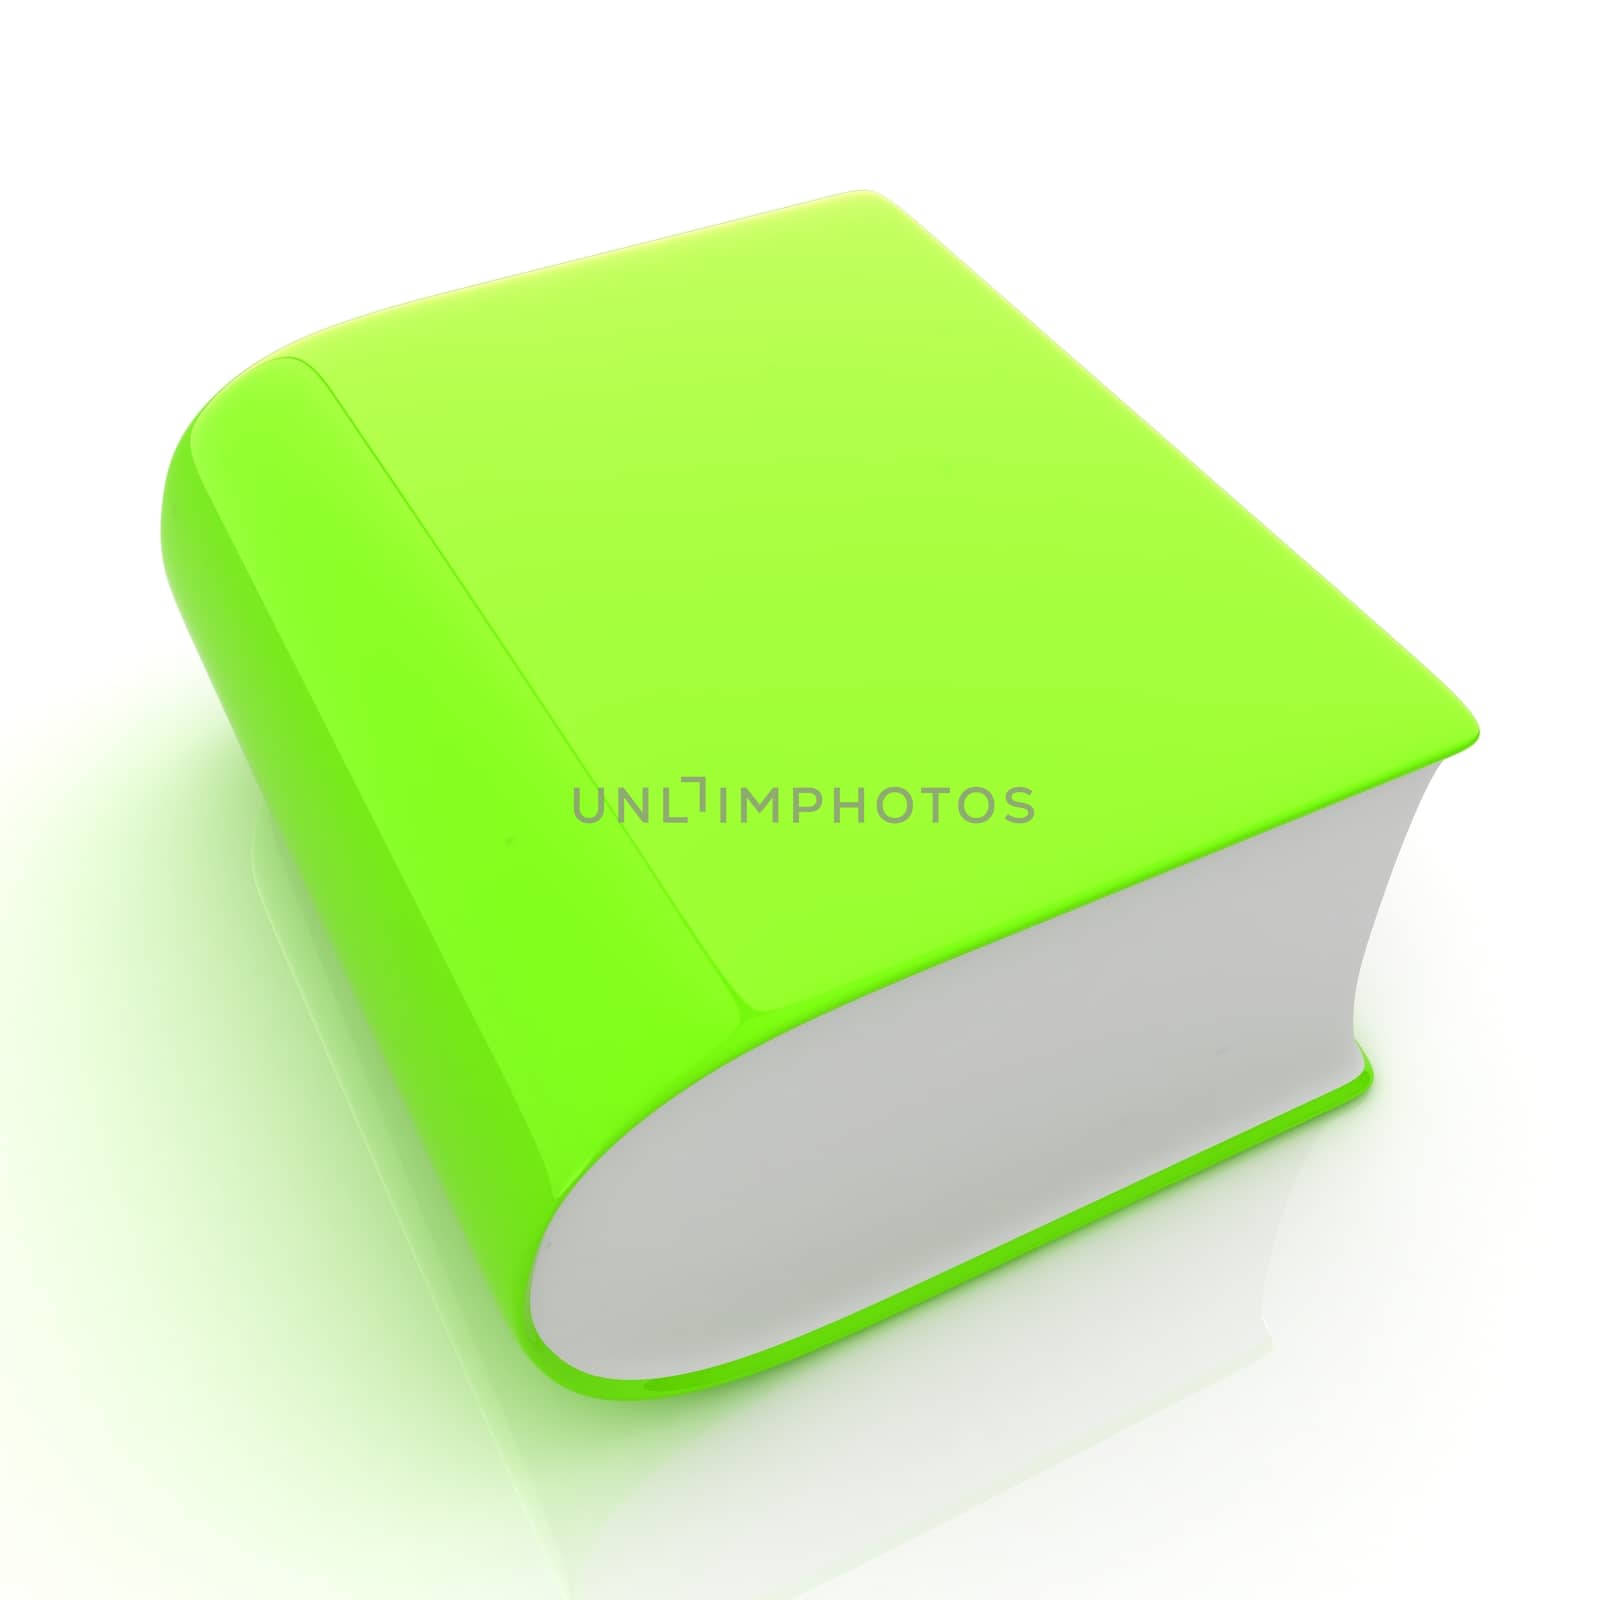 Glossy Book Icon isolated on a white background  by Guru3D